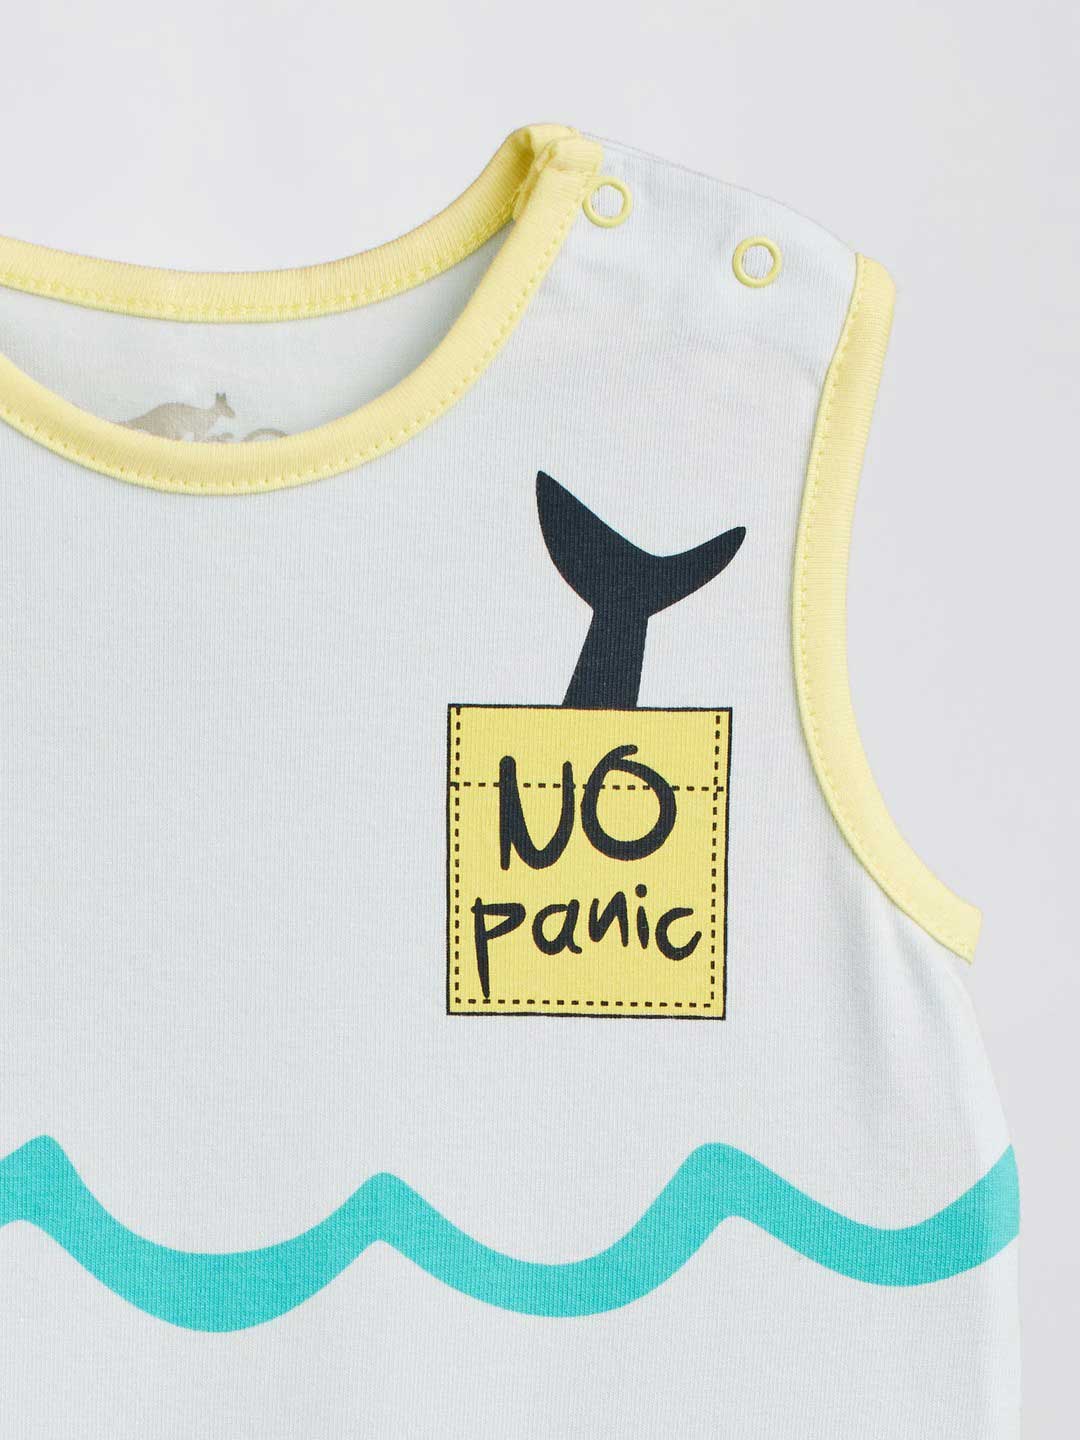 This cute shark print saying "No Panic" adds a cheerful touch to Baby Sleeveles Bodysuits 168 that have been designed to be stylish as well as comfy!